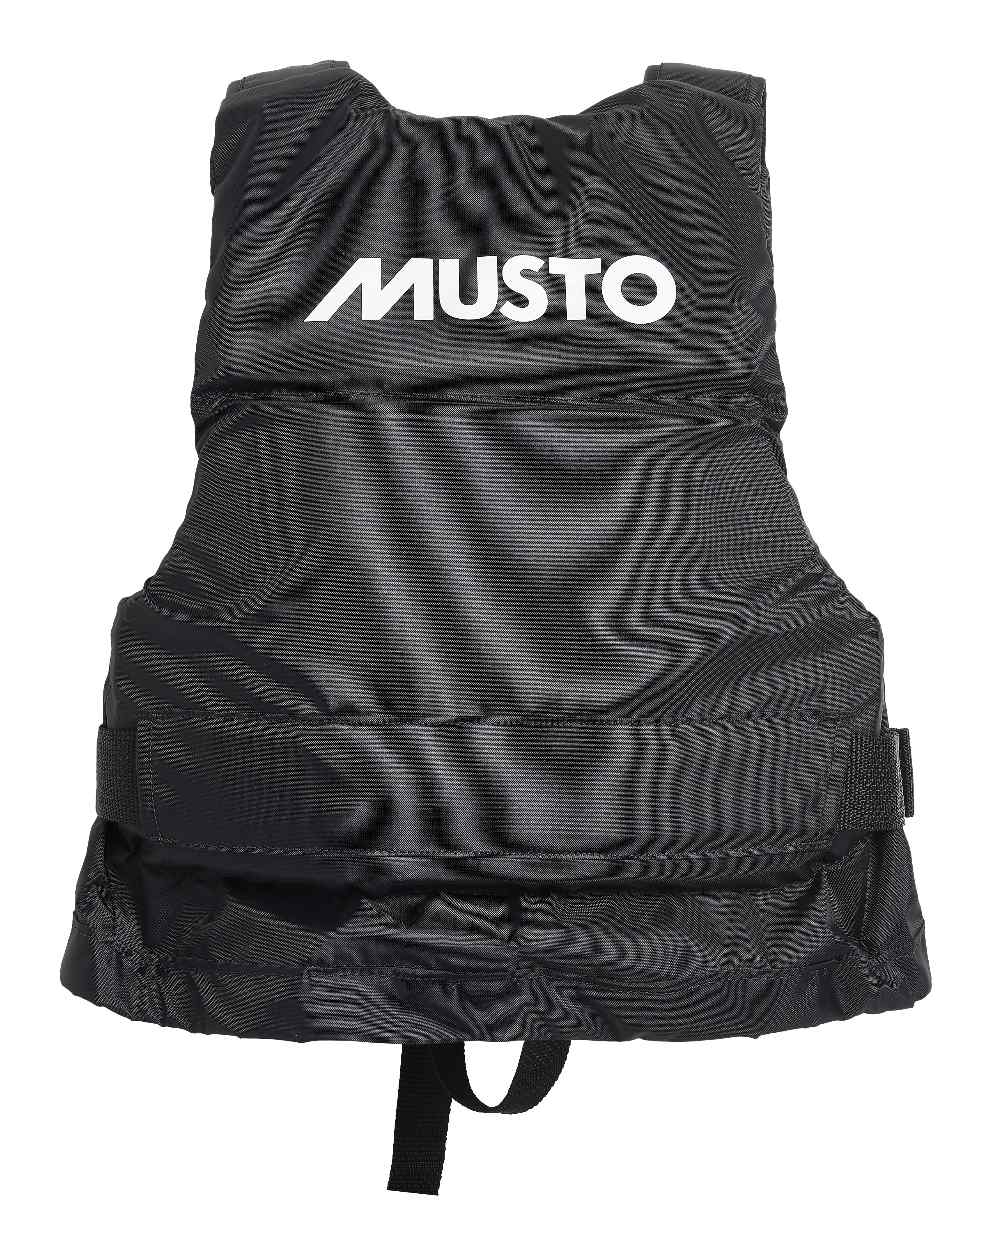 Black Coloured Musto Junior Buoyancy Aid On A White Background 